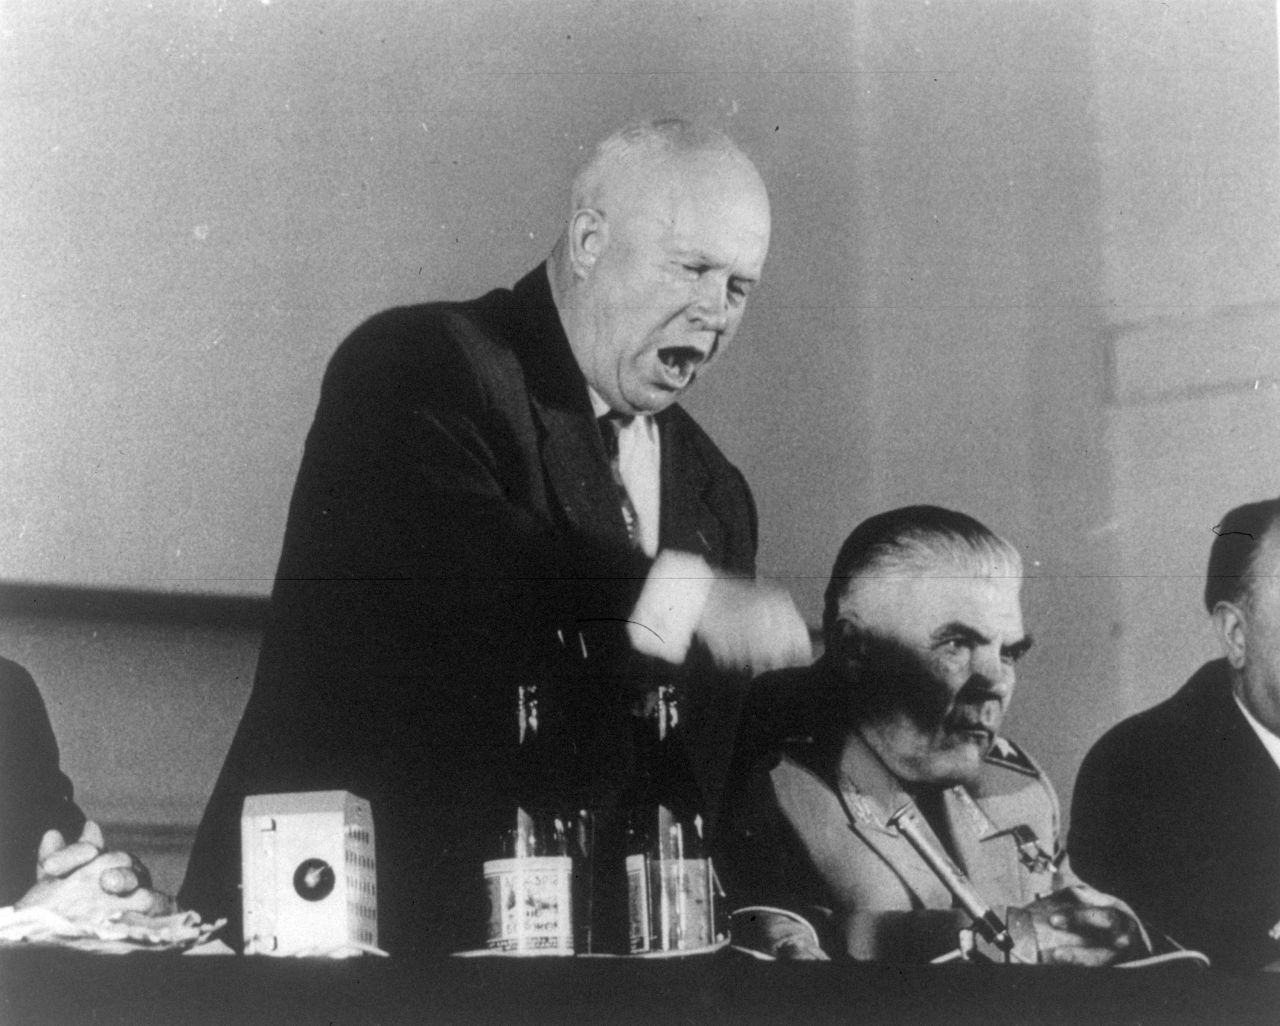 Khrushchev speaks at the 1960 Paris Summit, which was interrupted by the political fallout of an American spy plane shot down on a mission over the Soviet Union. After the Soviets announced the capture of pilot Francis Gary Powers, the United States recanted earlier assertions that the plane was on a weather research mission.